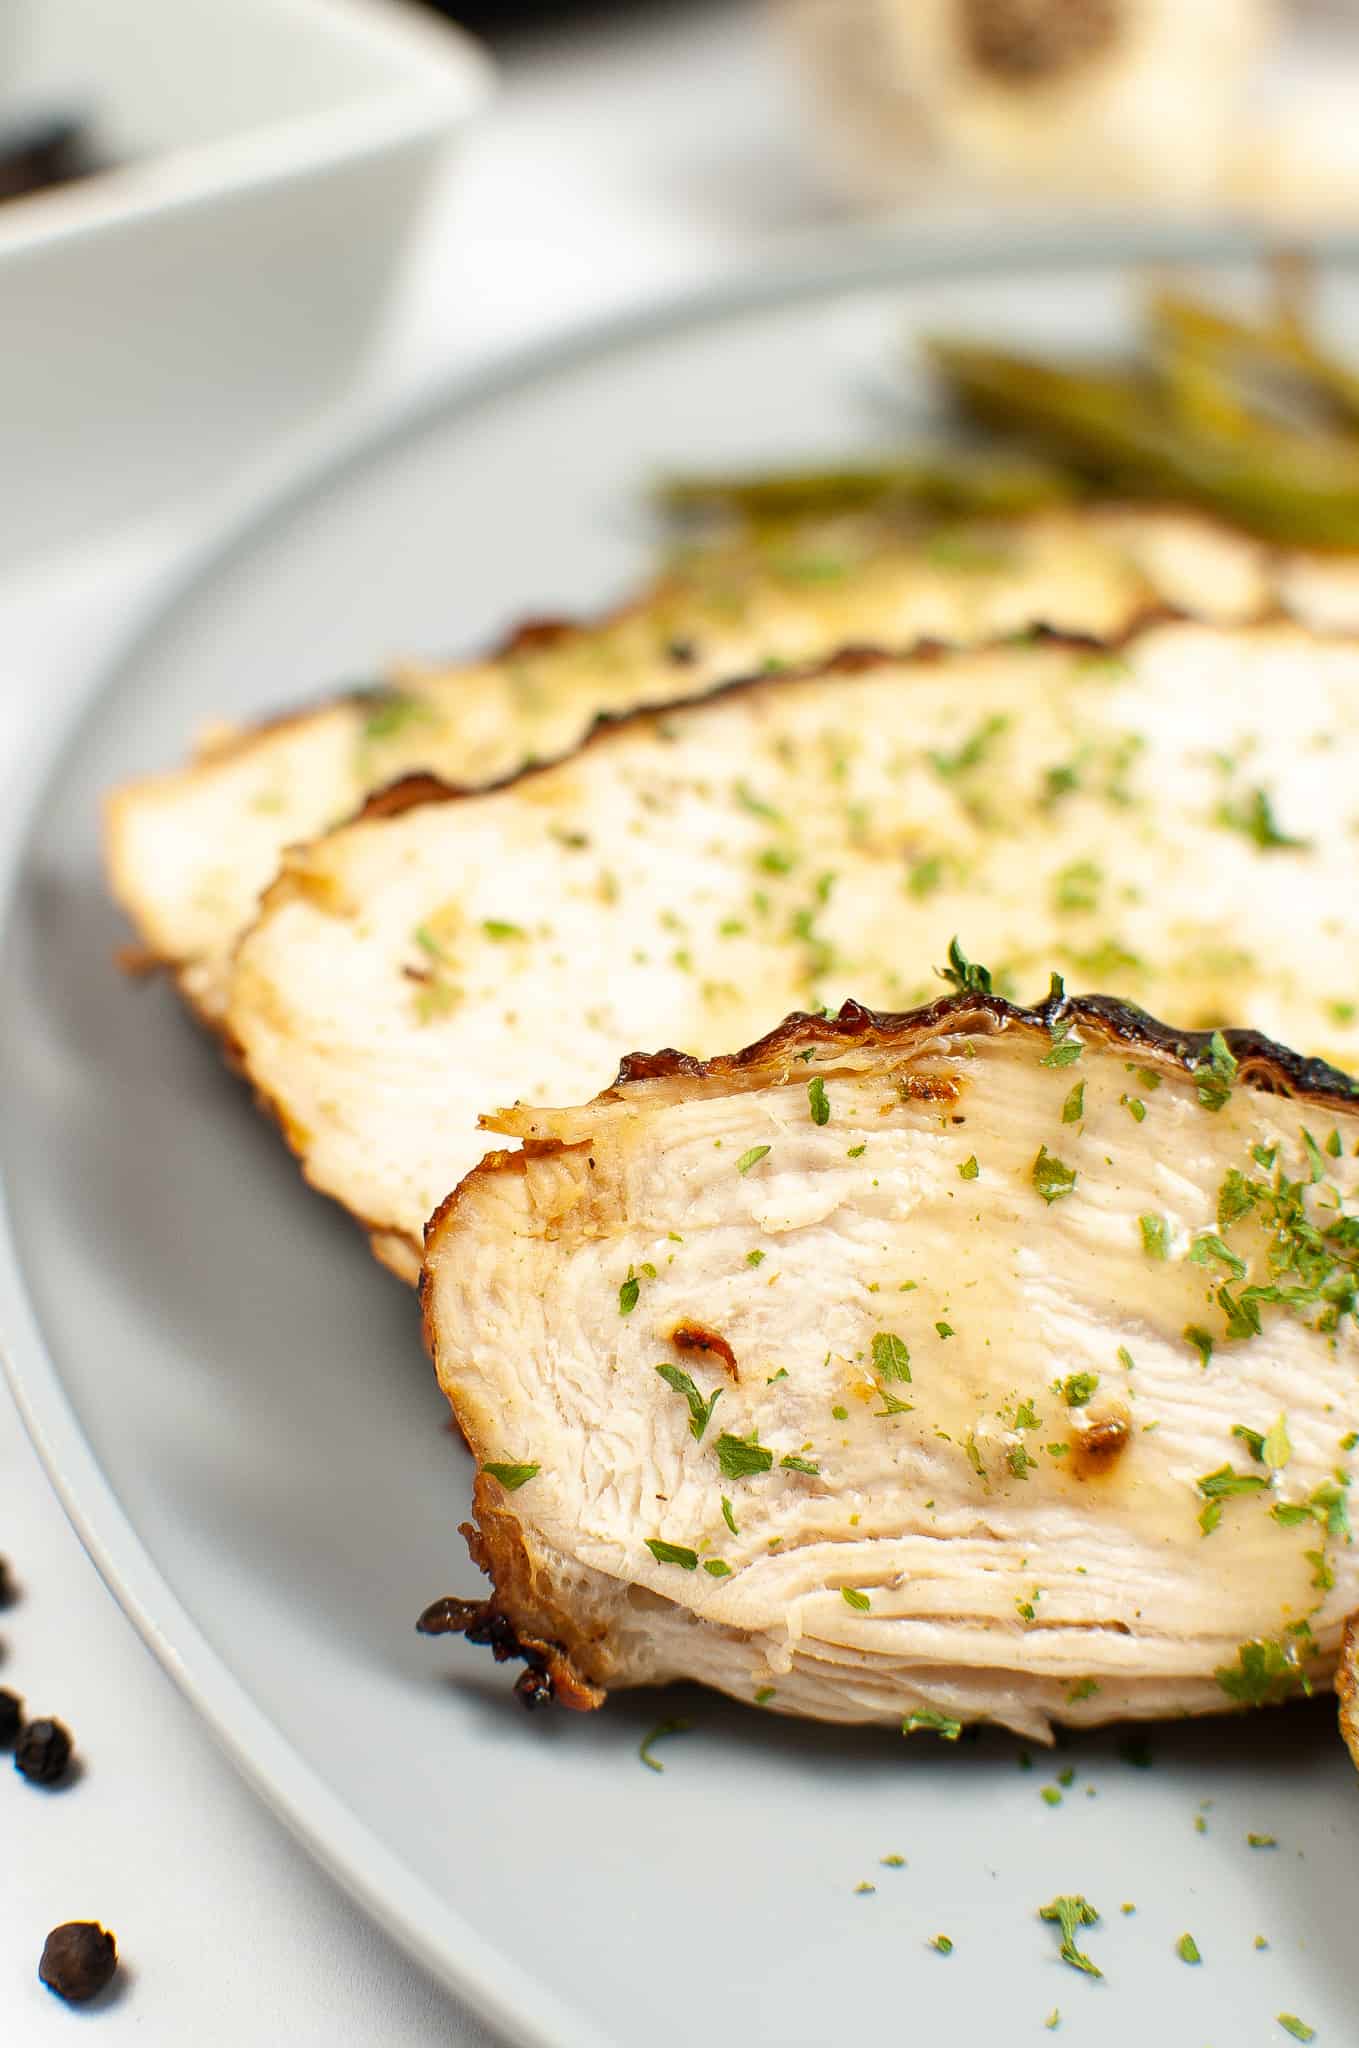 Turkey slices on a white plate with herbs on it and peppercorns on the side.